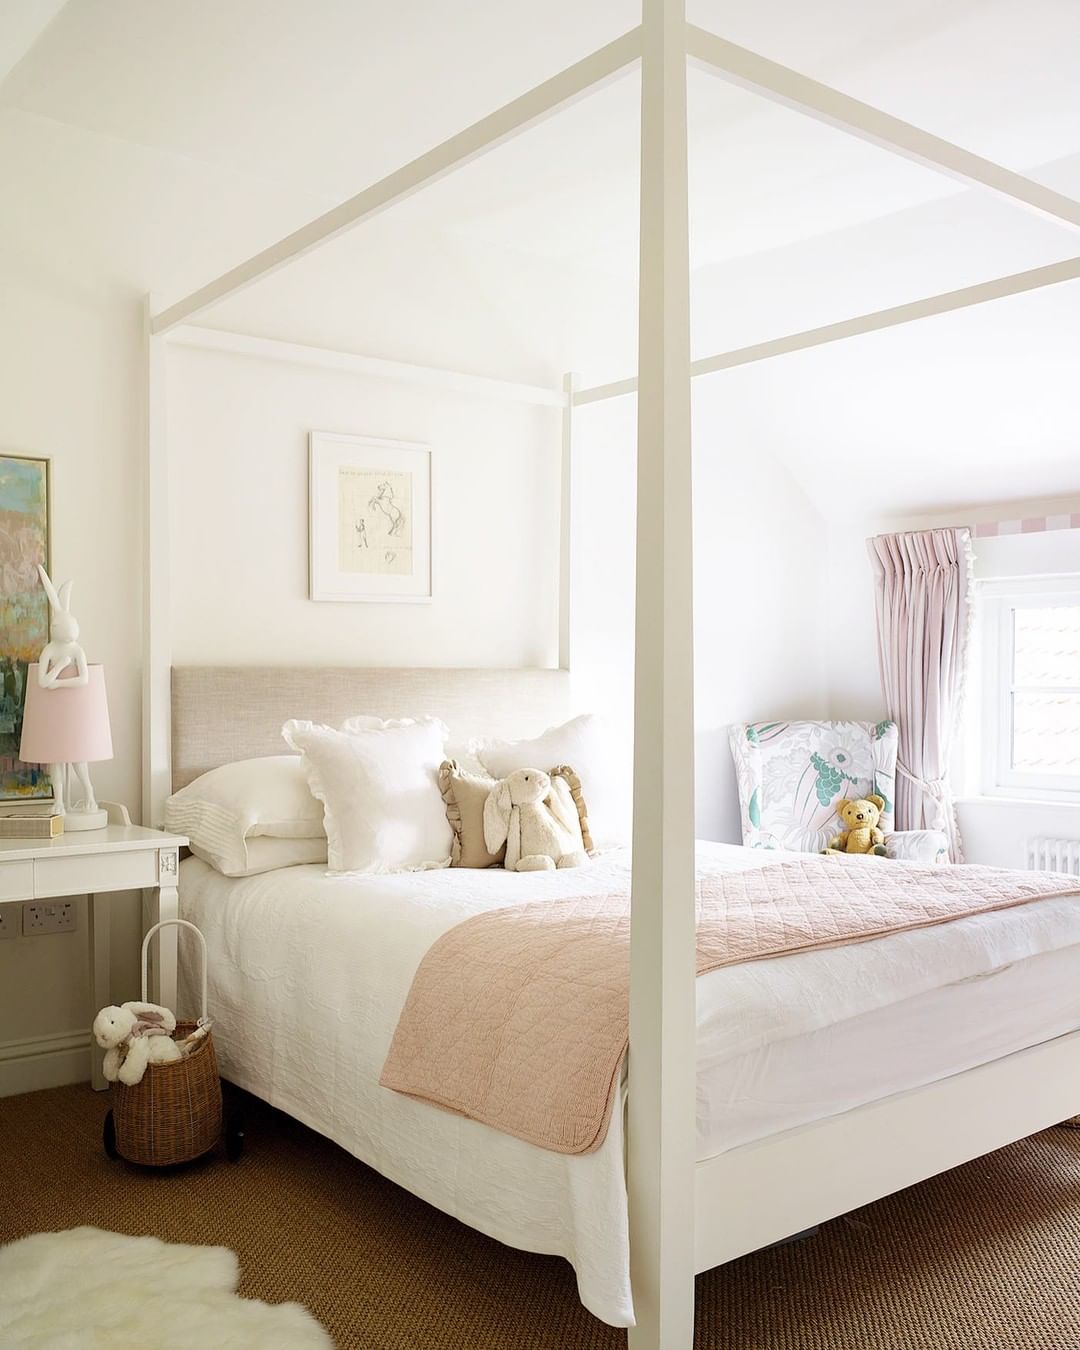 Delightful Four Poster Bed for a Child's Room